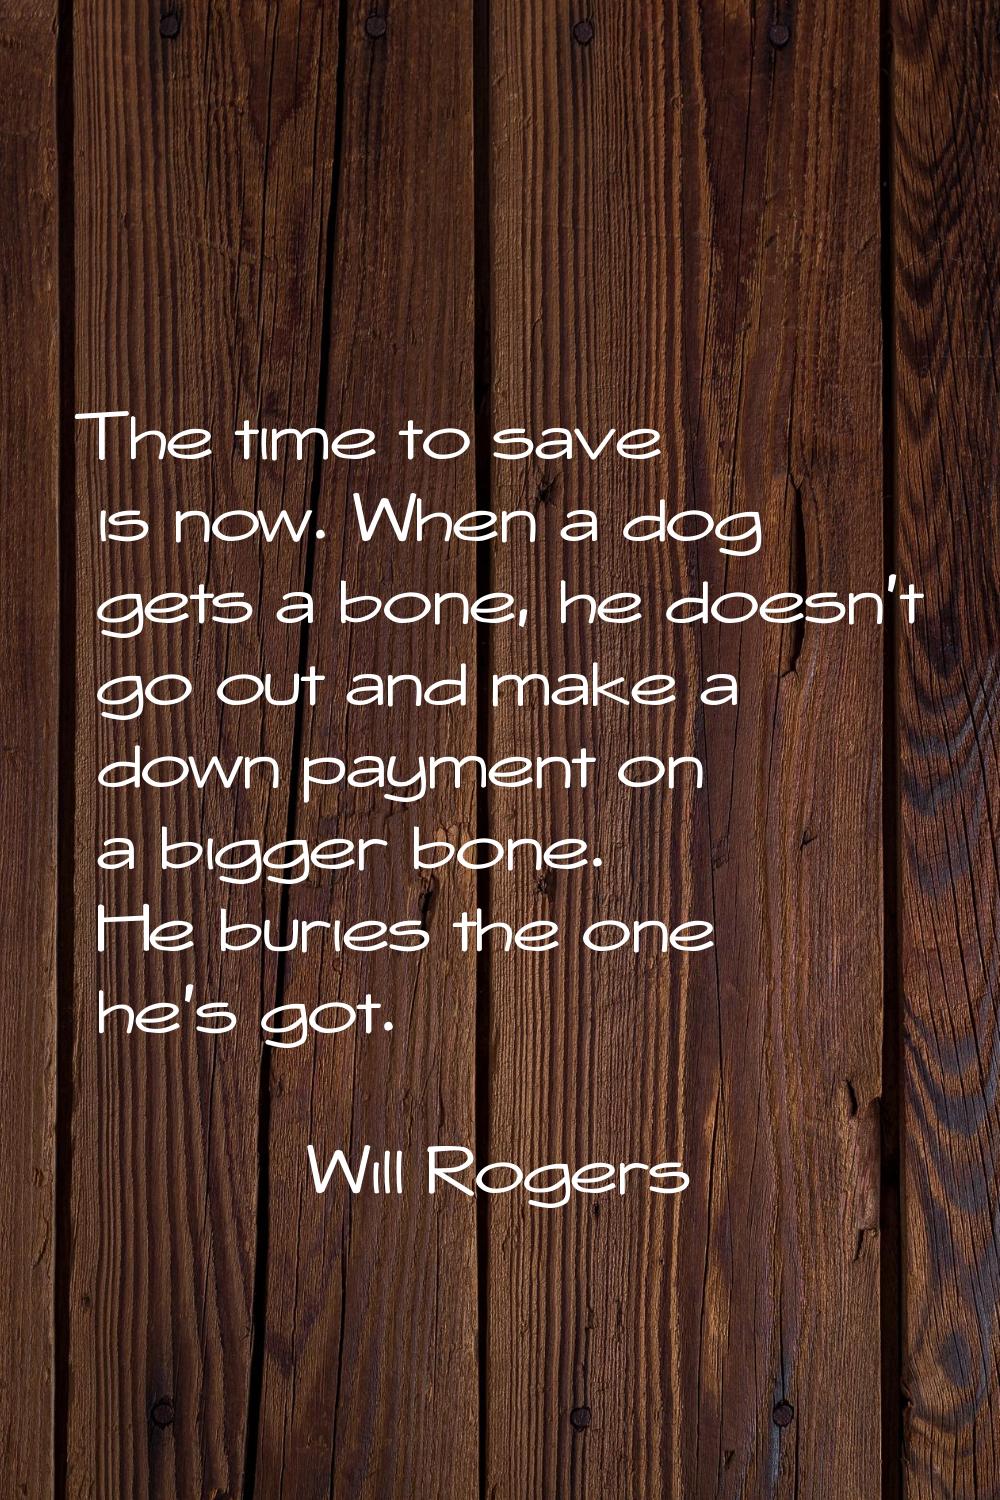 The time to save is now. When a dog gets a bone, he doesn't go out and make a down payment on a big